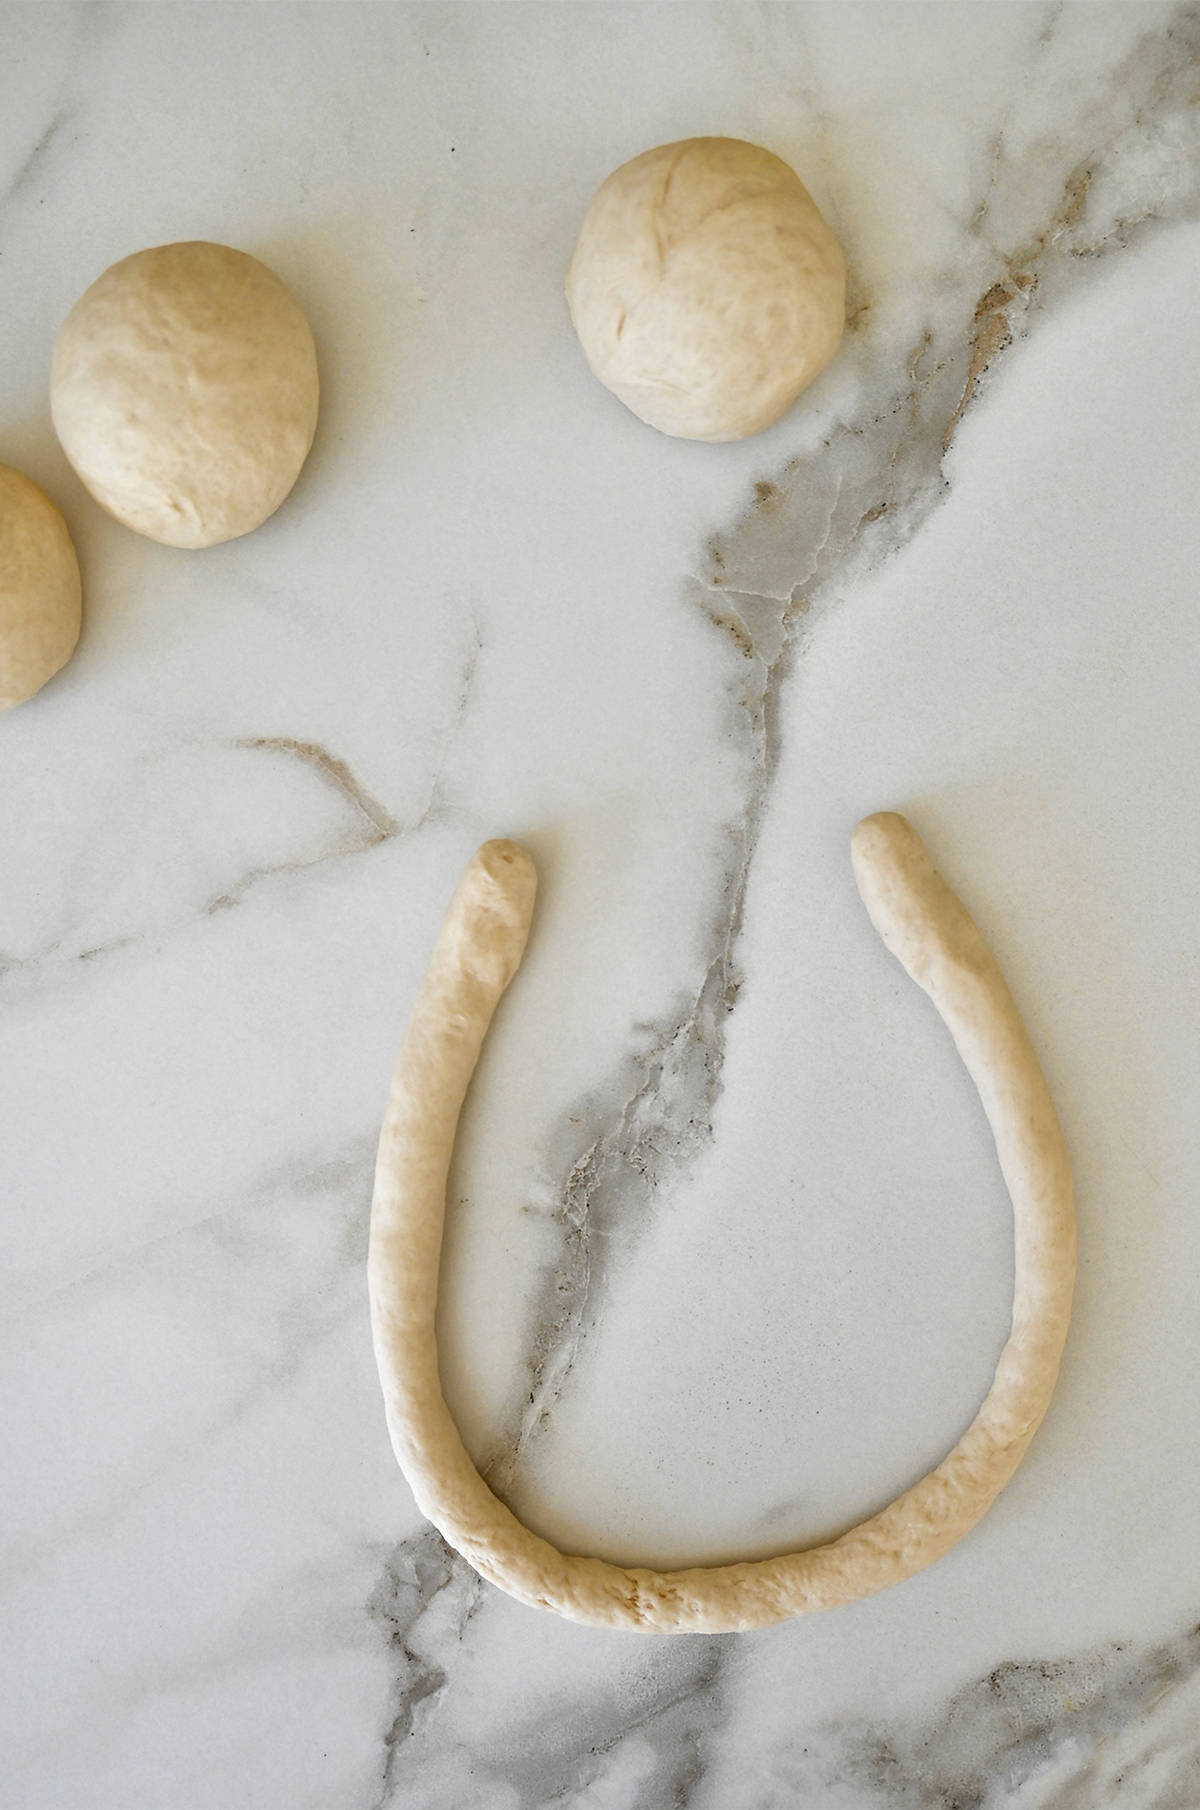 A long rope of dough in a "u" shape on a marble surface next to three balls of dough.